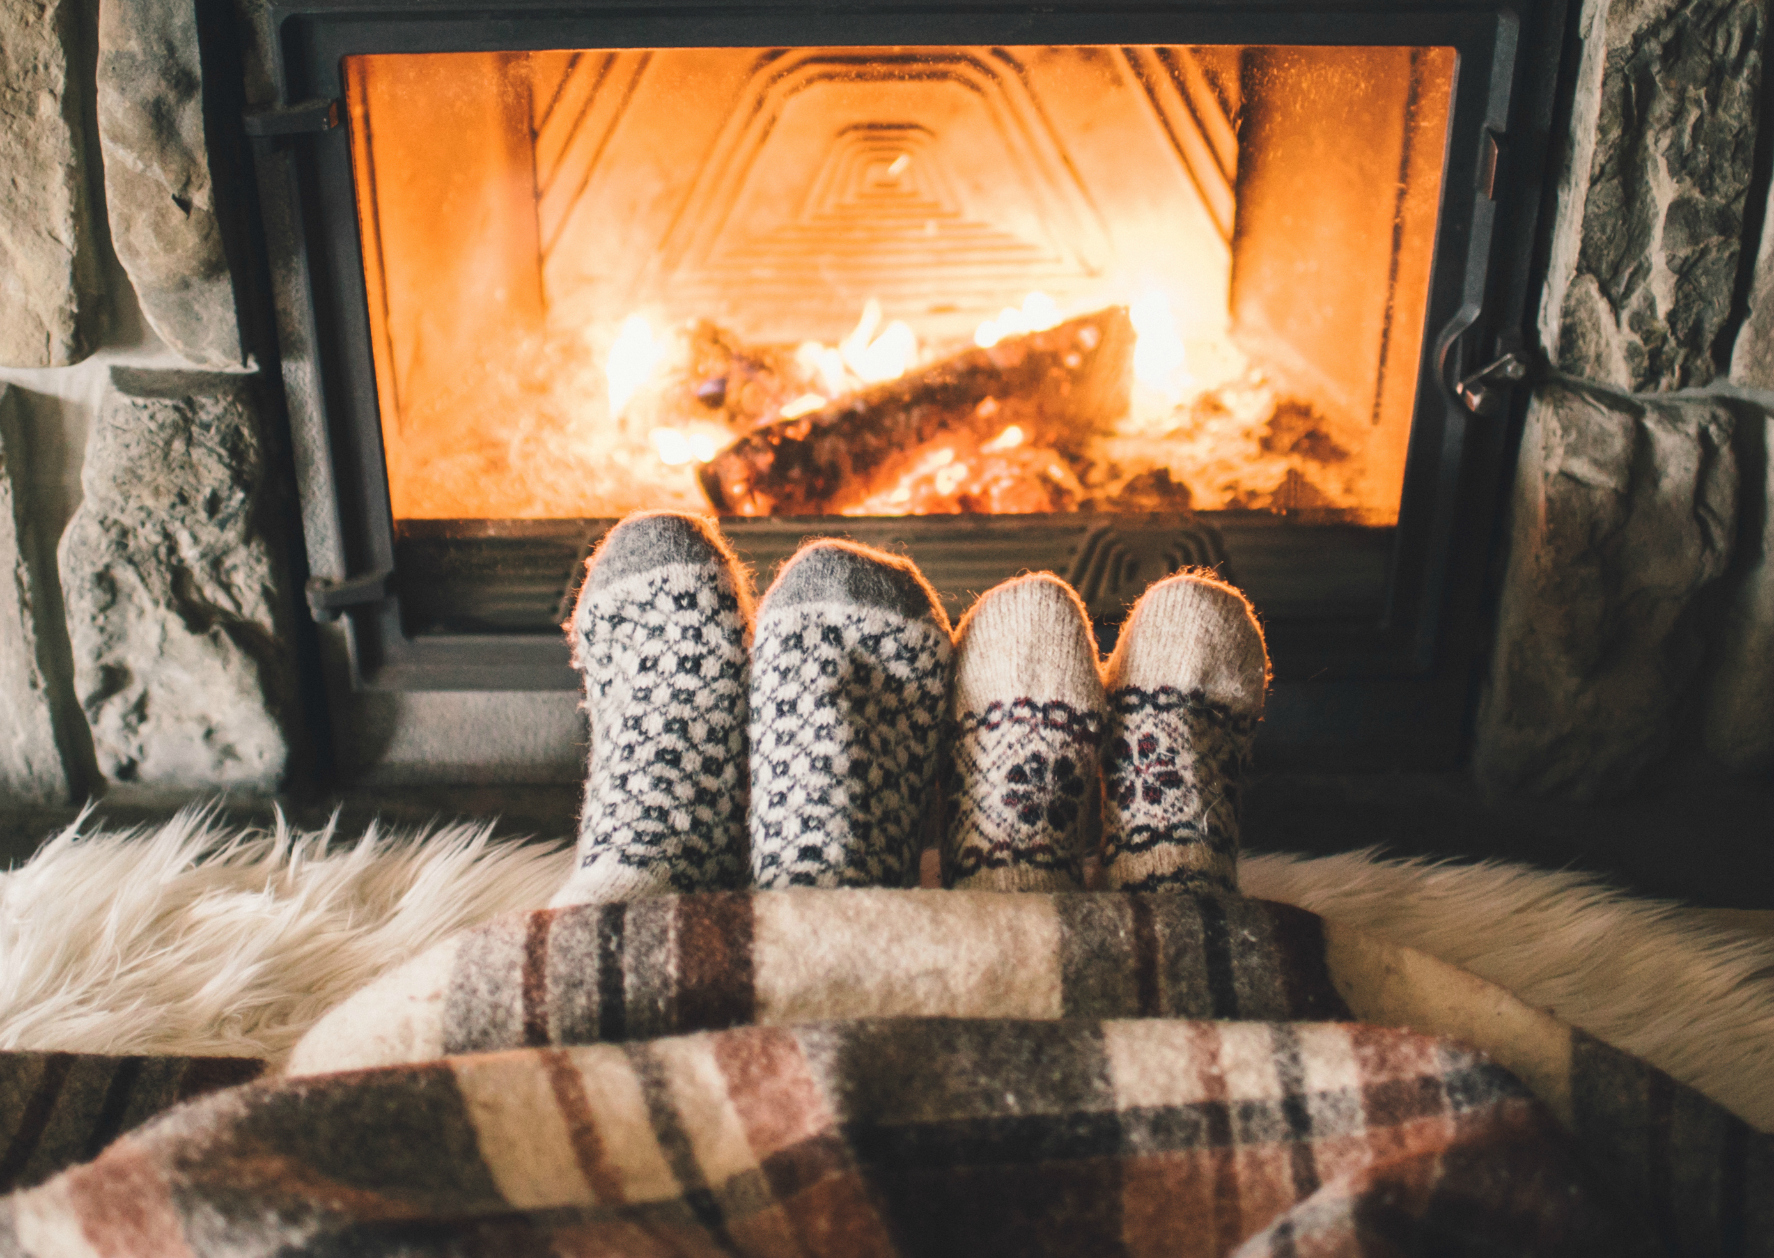 Eight Ways to Find ‘Hygge’ This Pandemic Winter - Yale Daily News